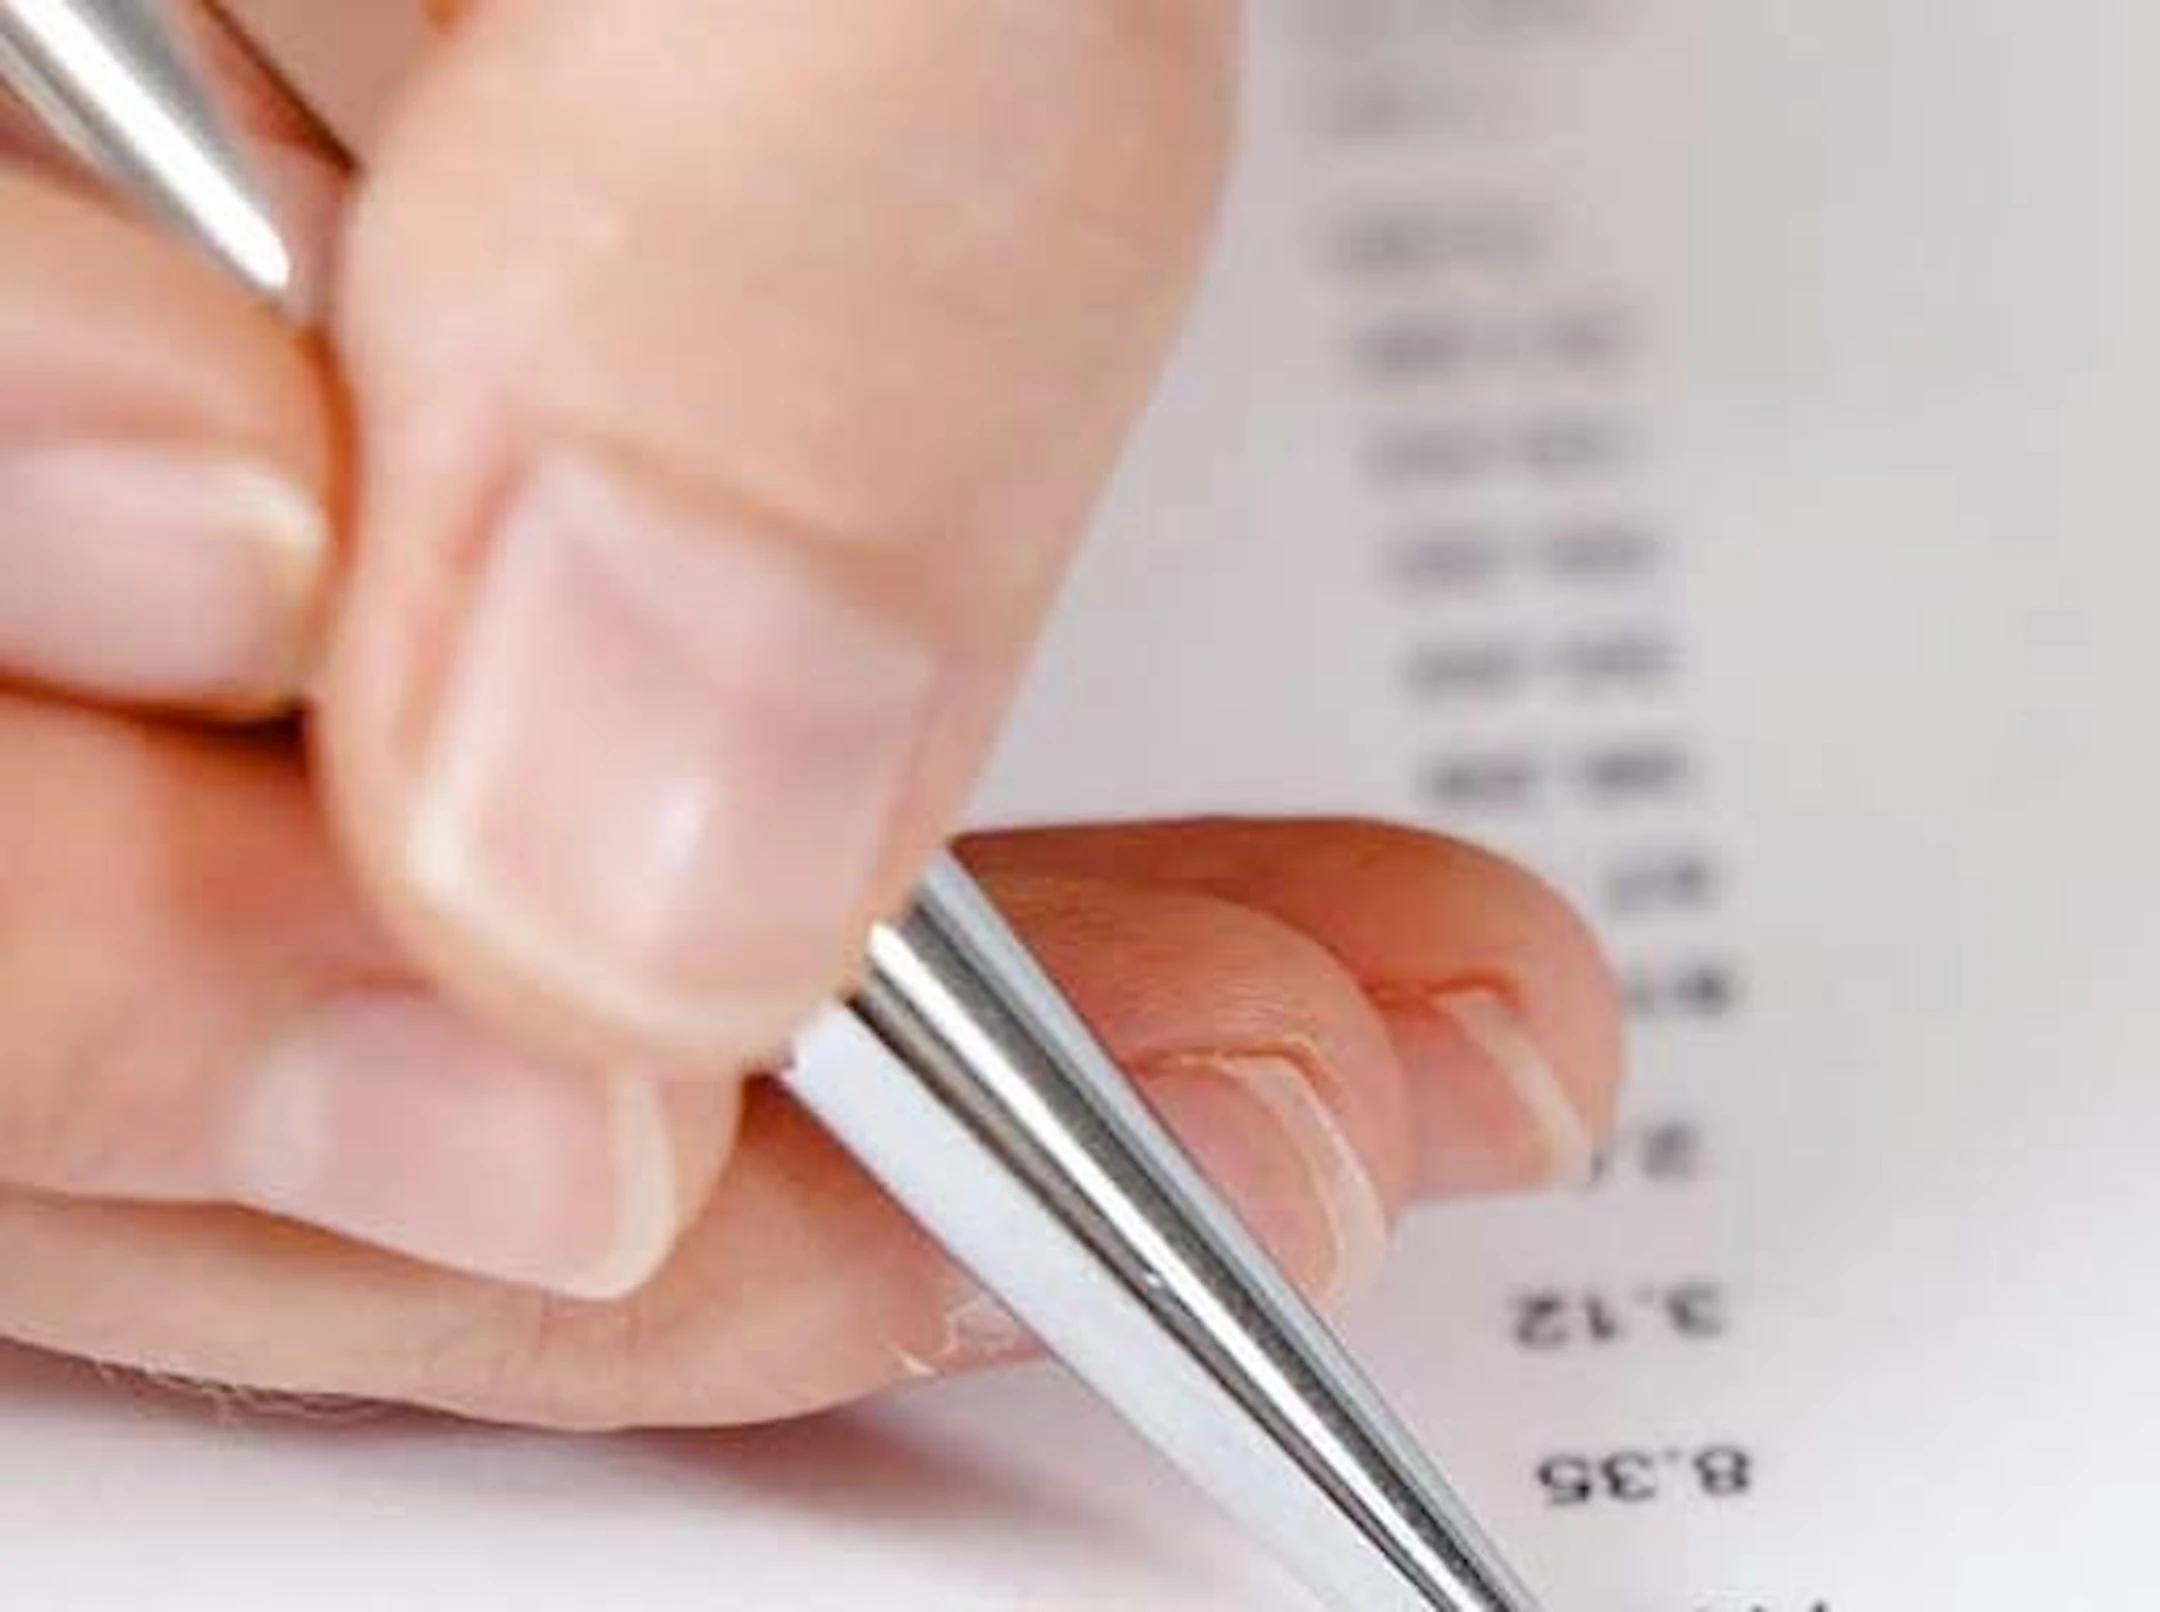 Lady using a pen to mark a financial document